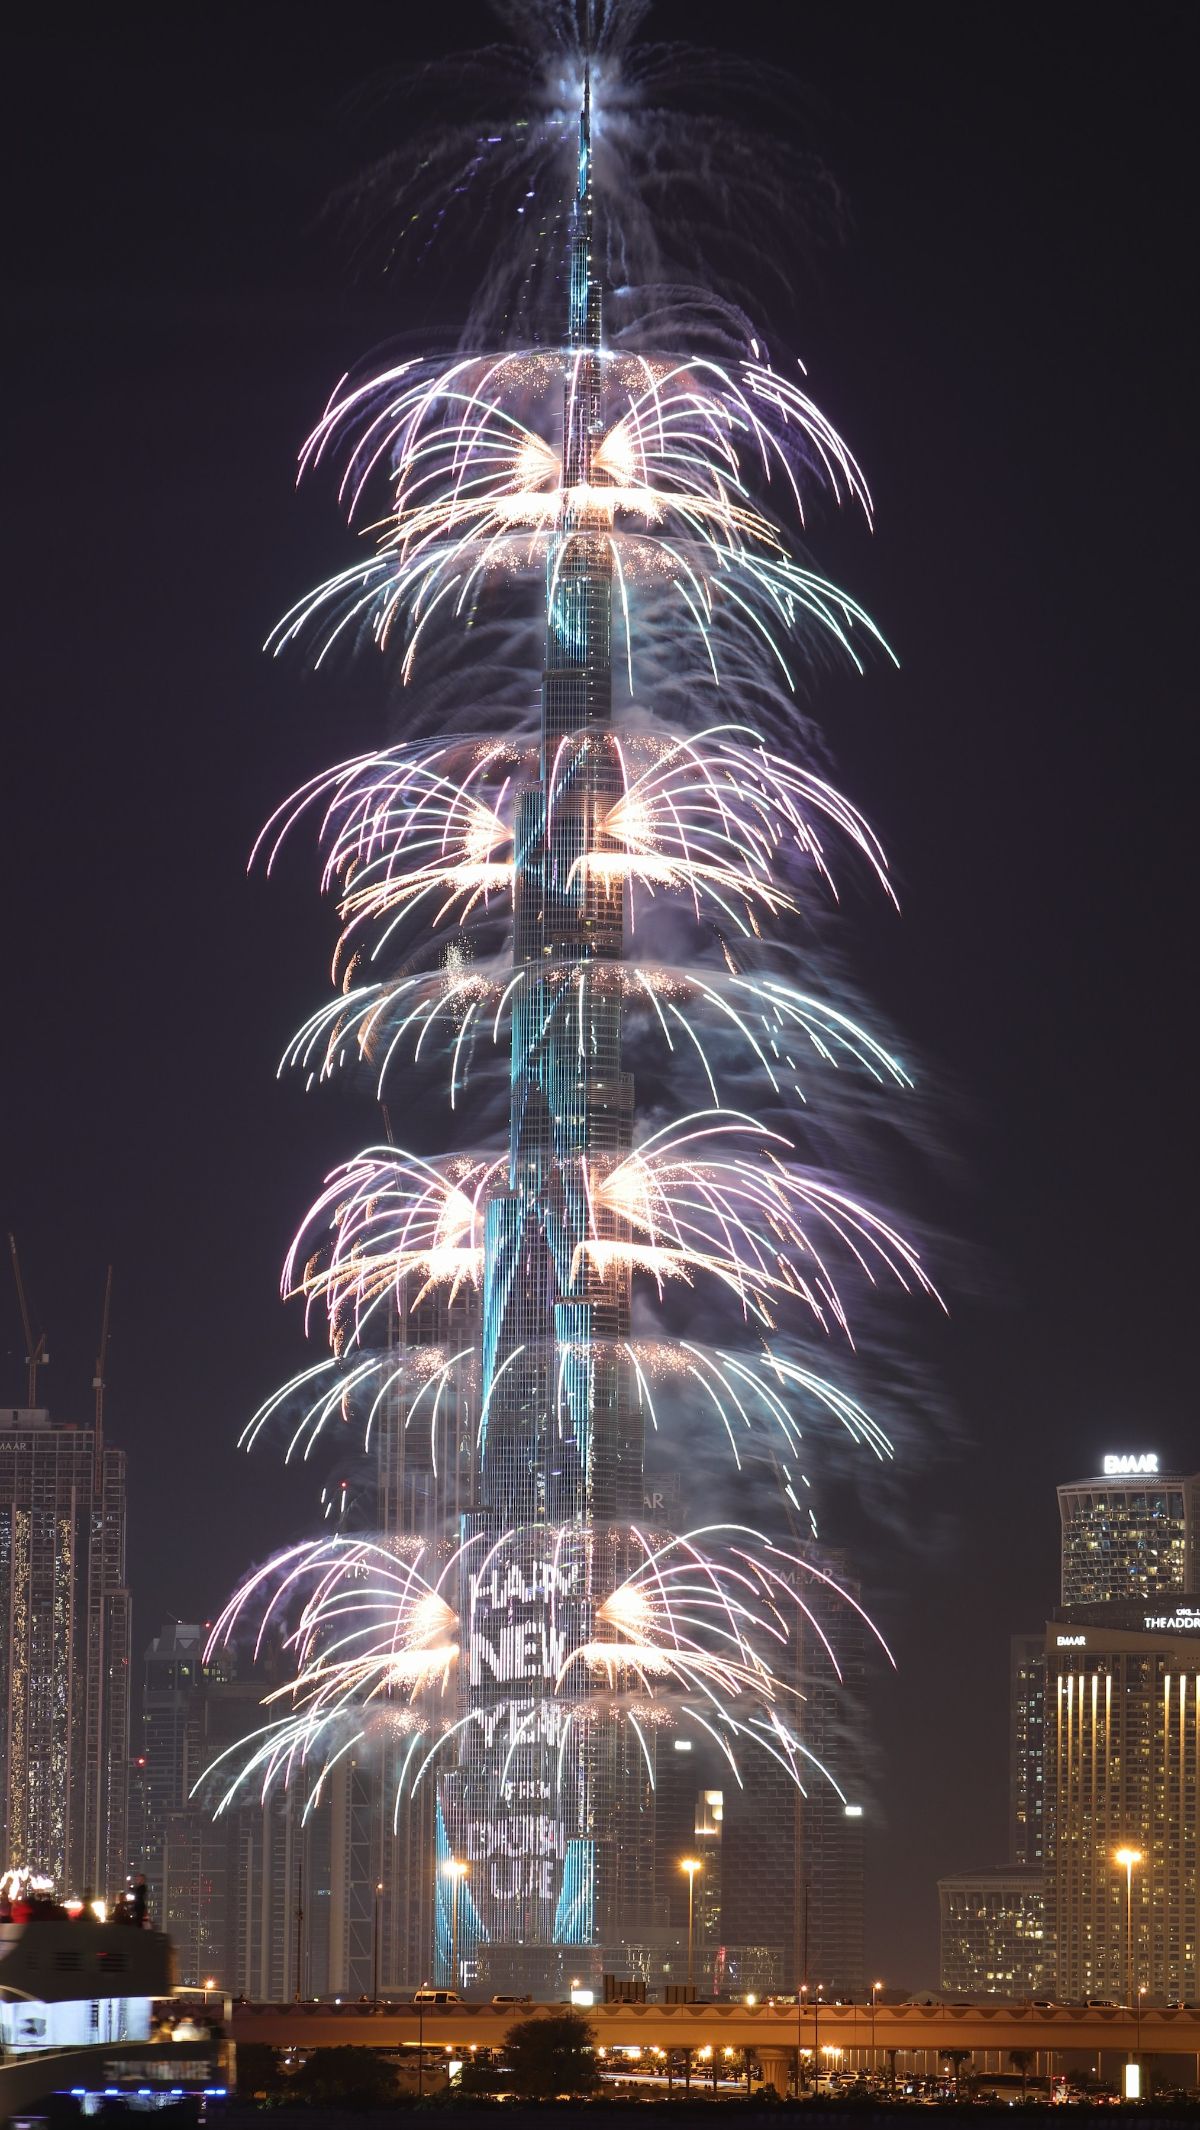 4. New Year's Eve Dubai: A Skyline Blazing with Luxury<br /><br
/>Dubai's reputation for luxury fans to its New Year's Eve celebrations. It is where the city's iconic landmarks serve as a canvas for a show of majesty. <br
/><br
/>Photo: arjun-radeesh-unsplash